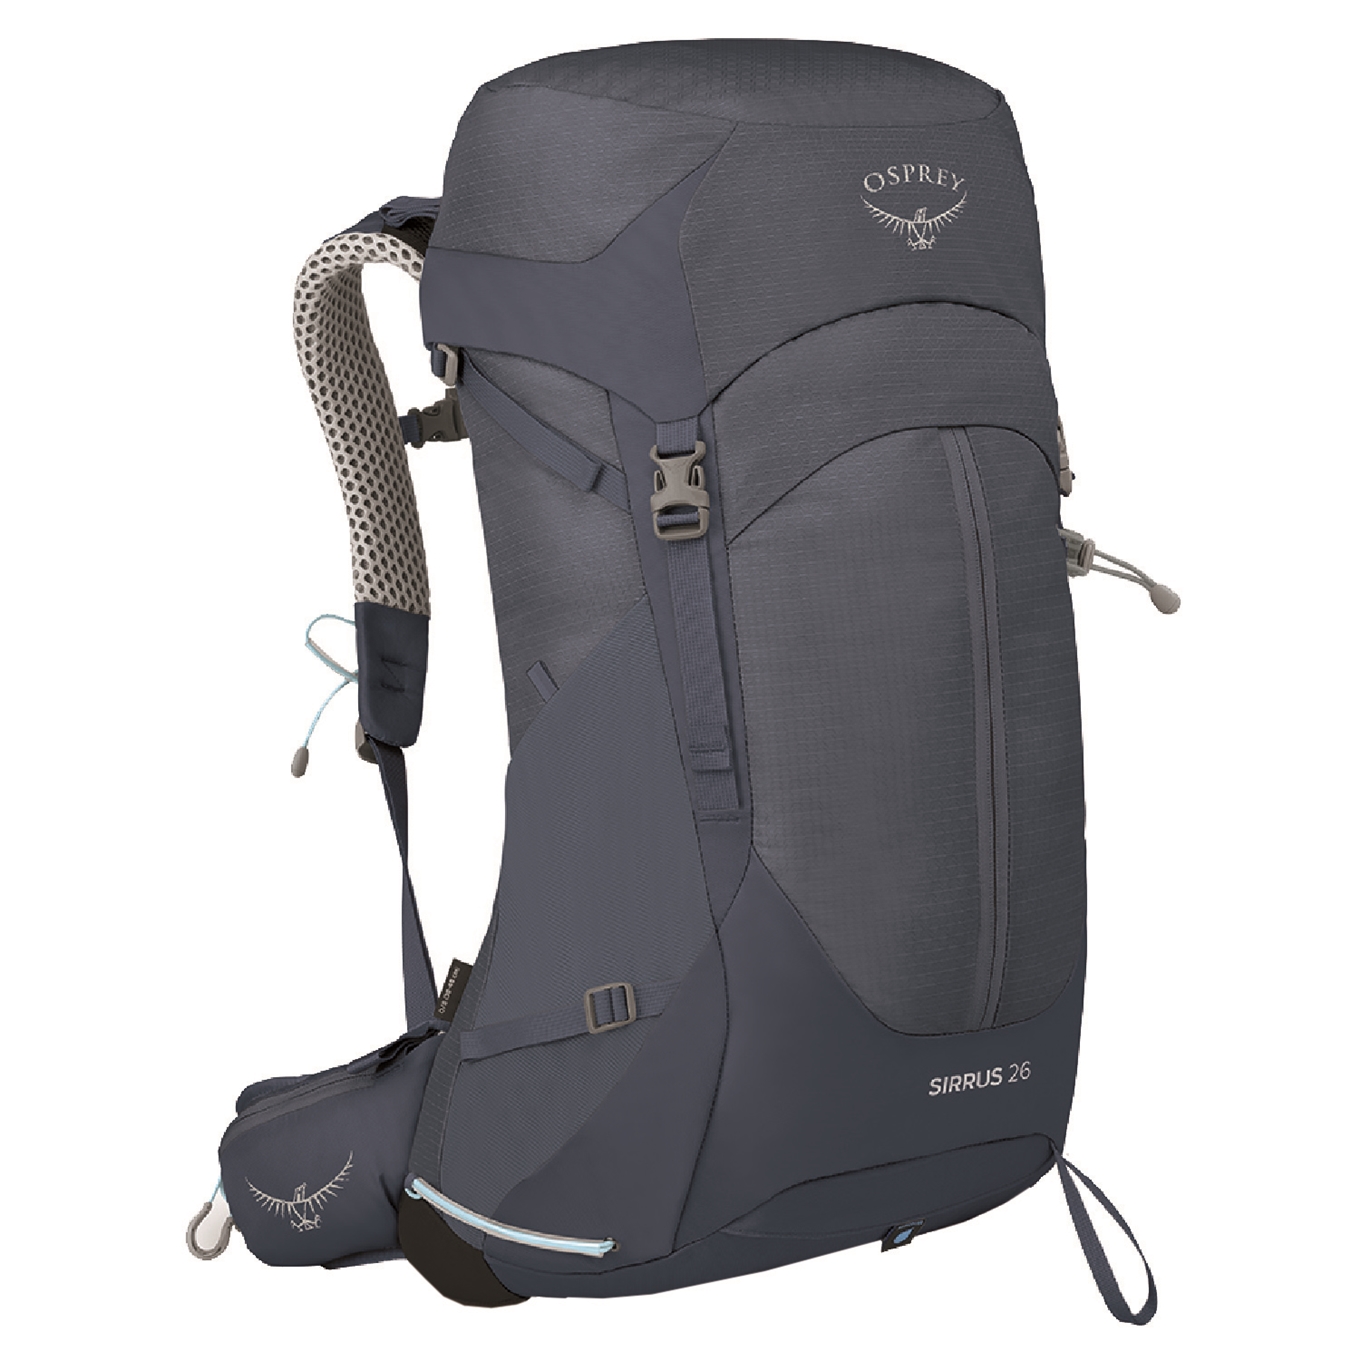 Osprey Sirrus 26 Backpack muted space blue backpack